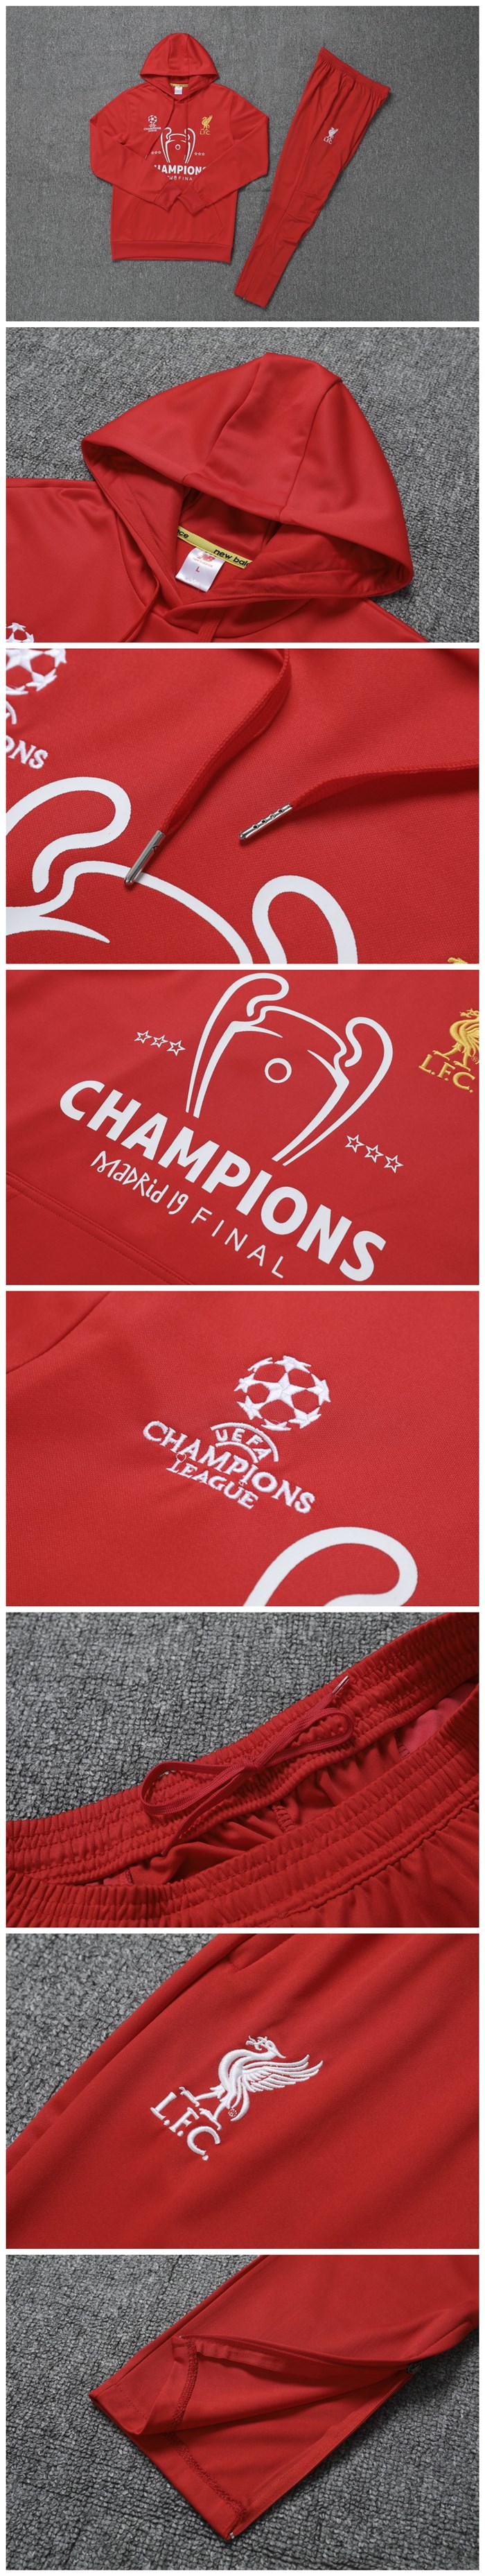 2019-20 Liverpool Red Champion Hoody Kits - Click Image to Close